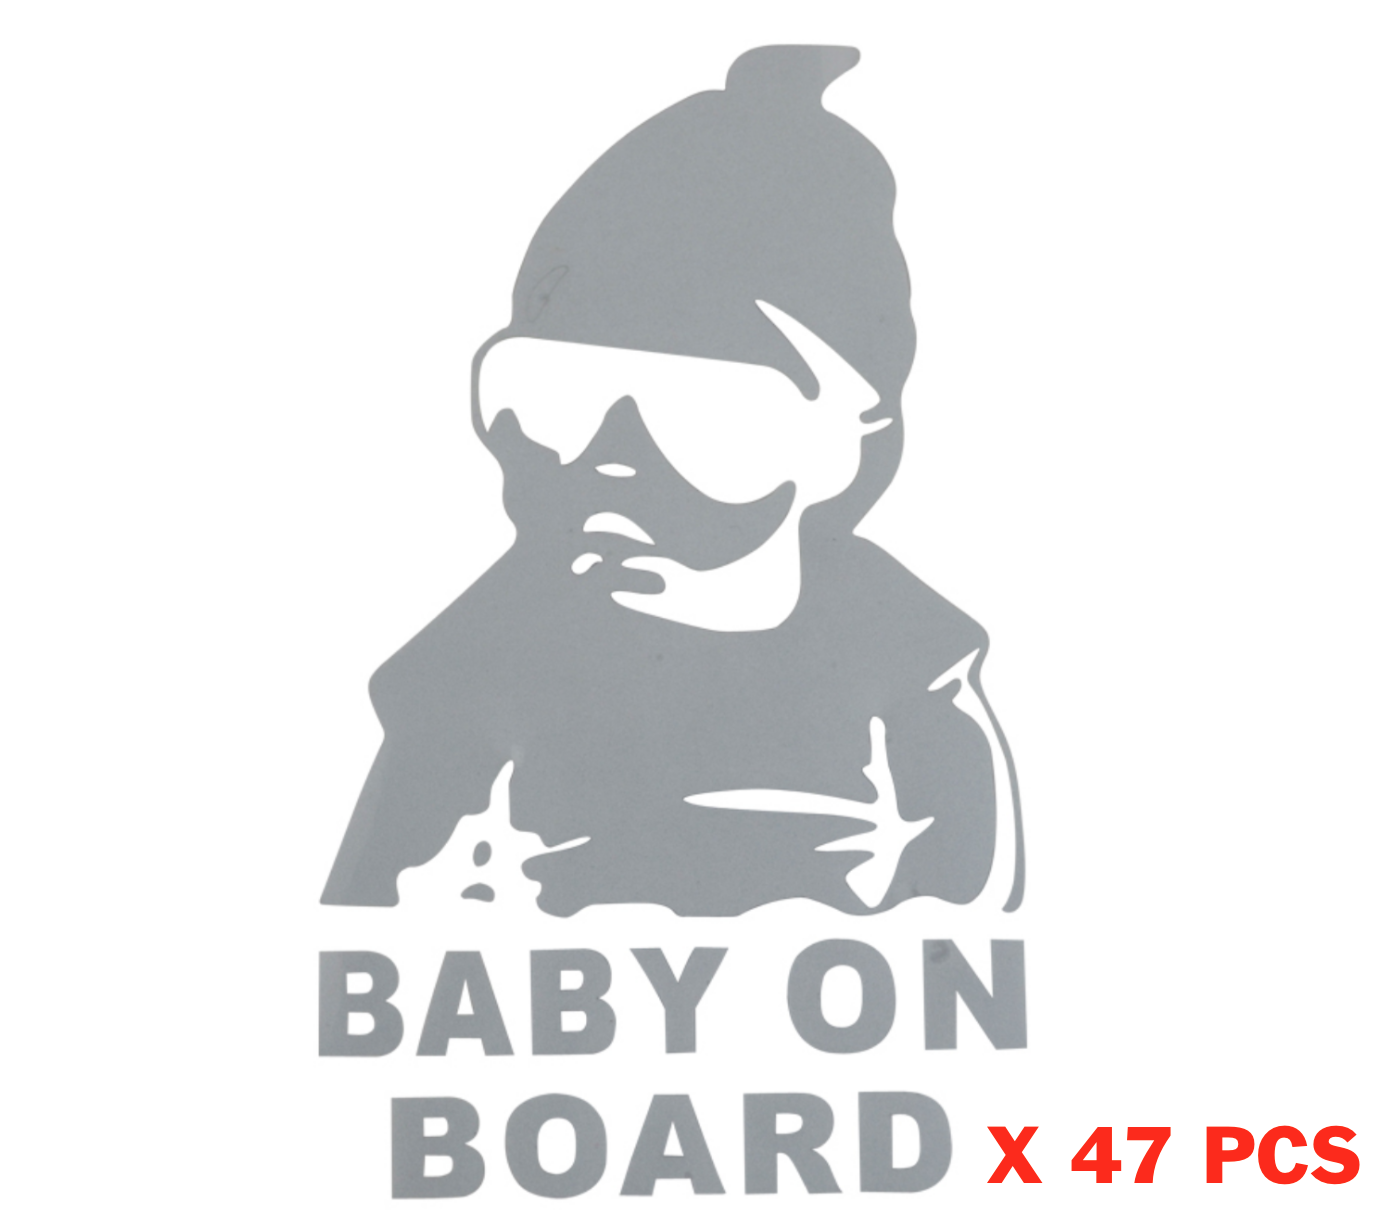 x 47 pcs BABY ON BOARD BEBE A BORD ARGENT SECURITE LOT PACK STICKER AUTOCOLLANT ADHESIF AUTO CAR SILVER TRUCK VAN VOITURE VEHICULE 15 cm ADHESIF X000MR6PQ7 COMASOUND KARTEL CSK ONLINE